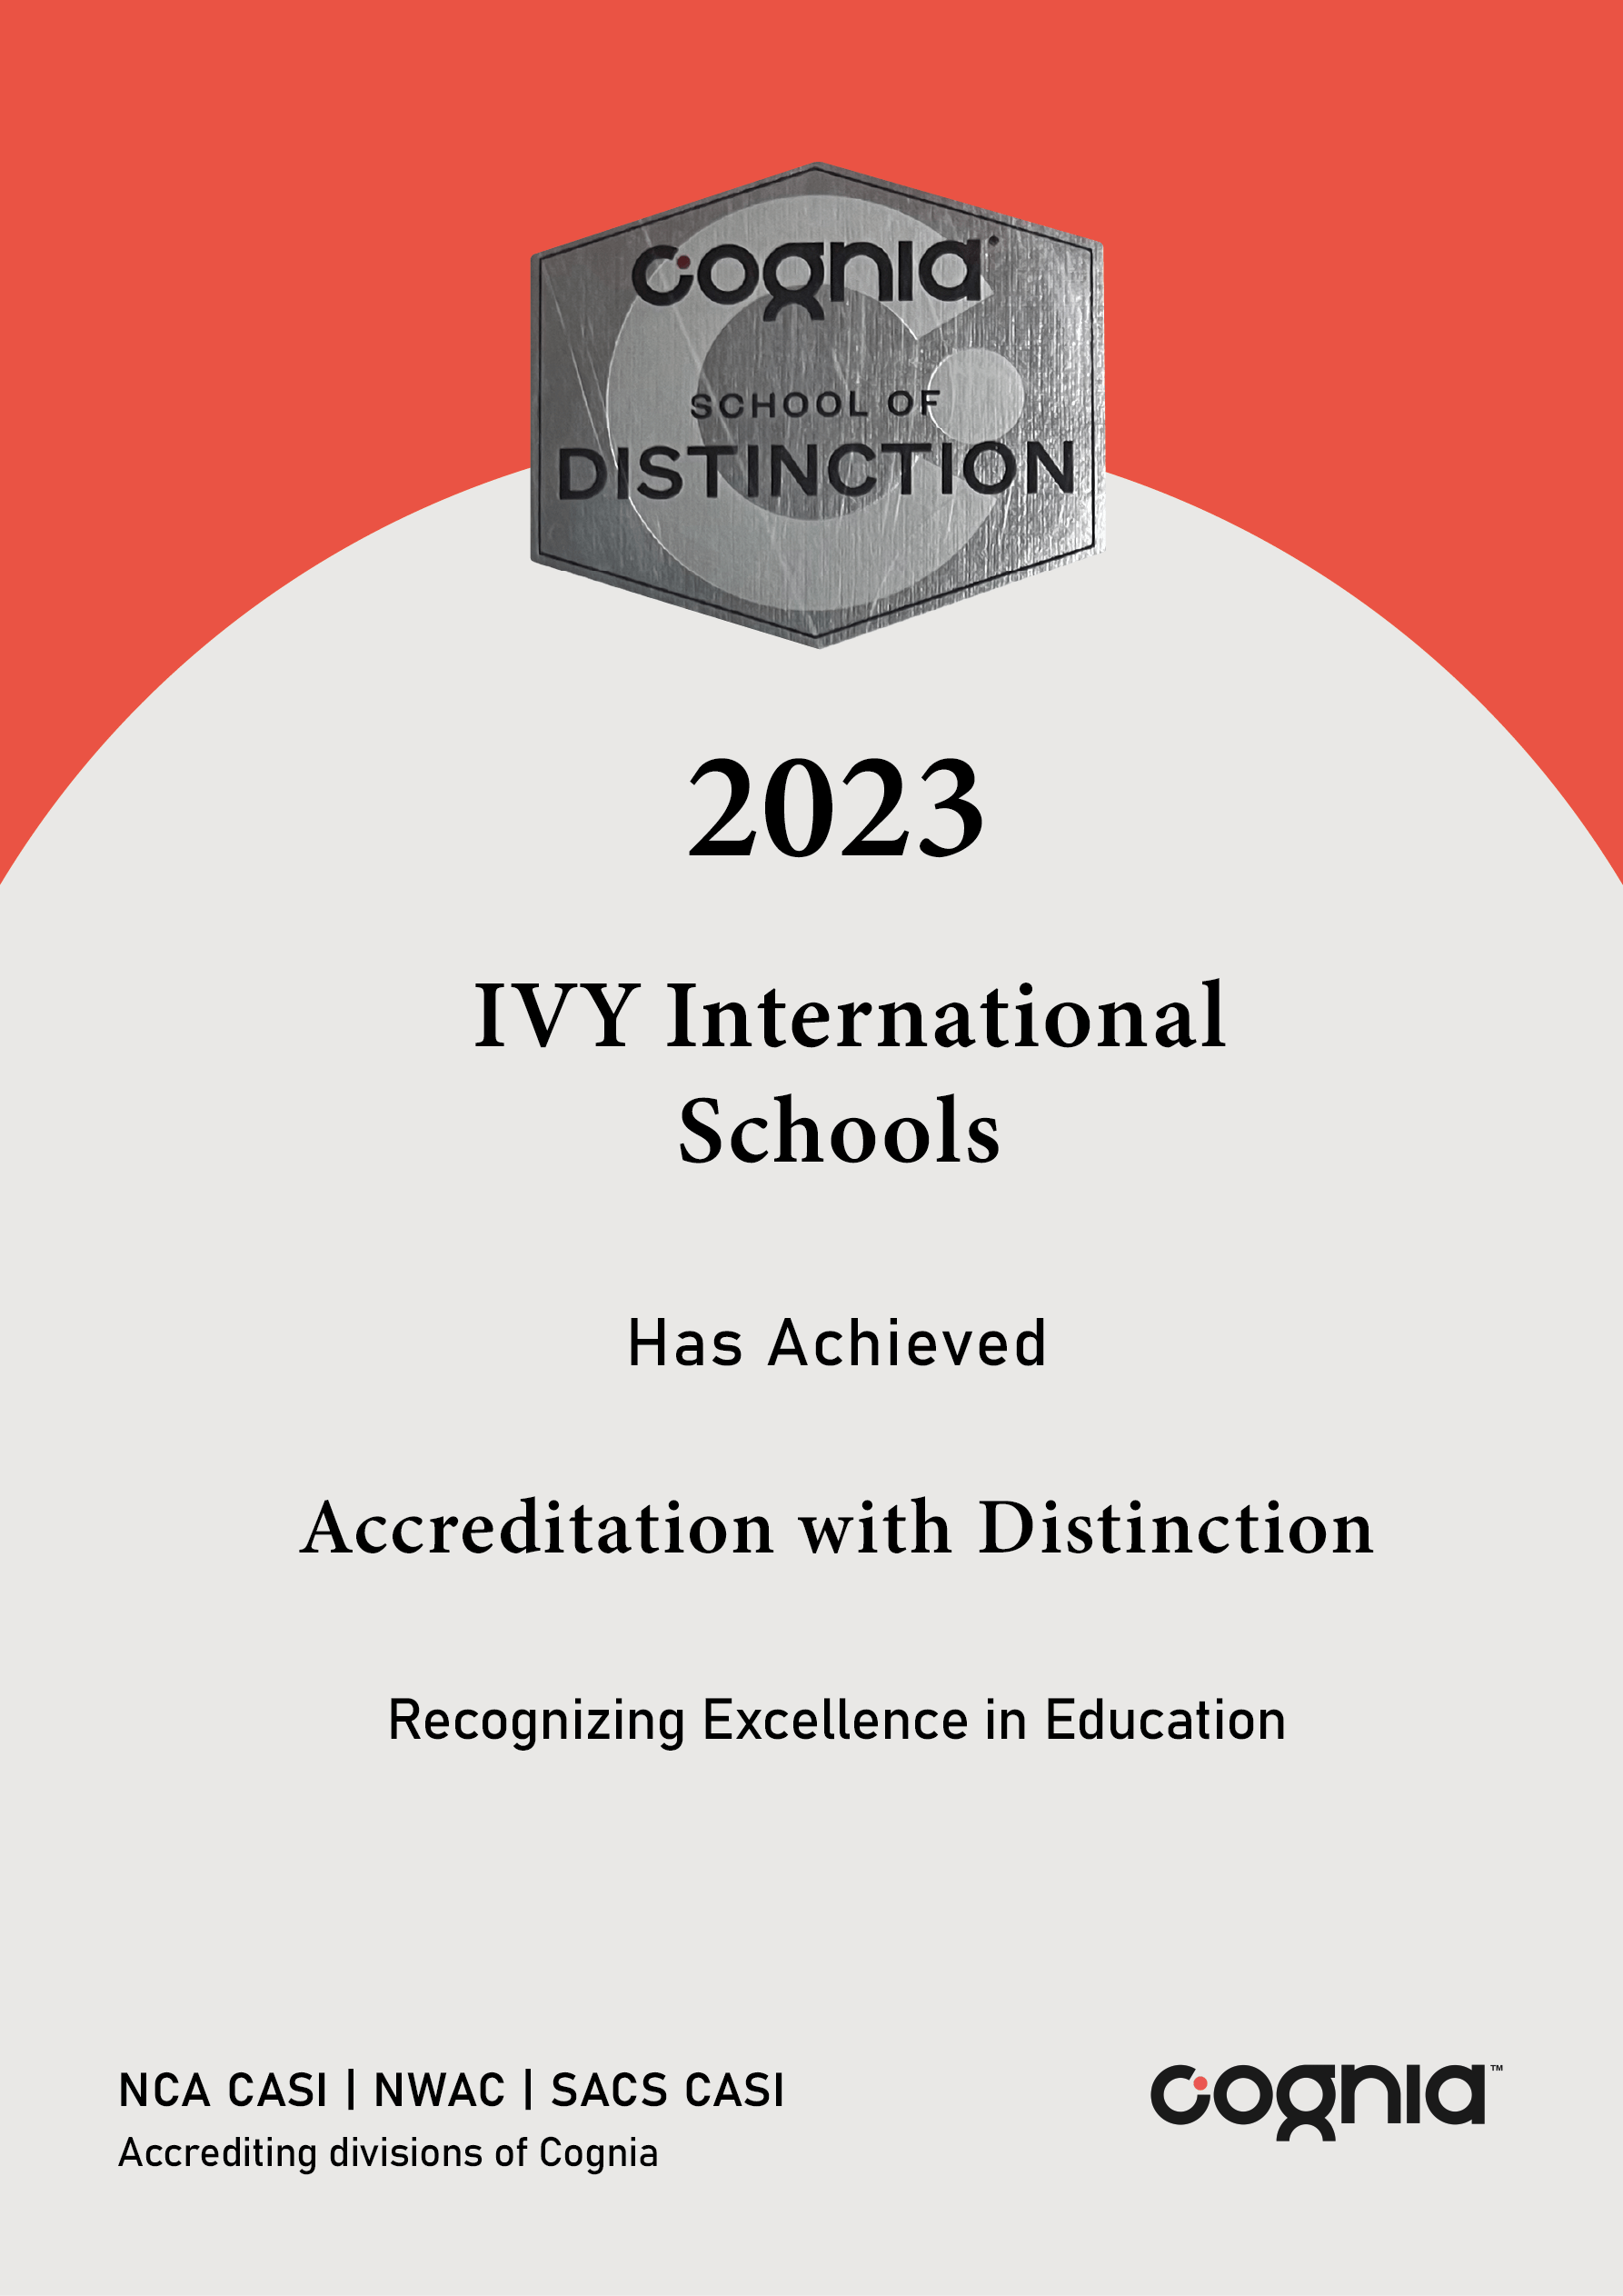 IVY International Schools in Cairo, Egypt has been awarded accreditation by the North Central Association Commission on Accreditation and School Improvement (NCA CASI), the Northwest Accreditation Commission (NWAC), and the Southern Association of Colleges and Schools Council on Accreditation and School Improvement (SACS CASI). This prestigious accreditation is recognized worldwide and signifies IVY's commitment to providing high-quality education.School
As an accredited institution, IVY International Schools is part of the Cognia global network, which includes over 36,000 schools and systems in 85 countries. This network is dedicated to continuous improvement through accreditation. IVY International Schools will continue to engage in the responsibilities required to maintain accreditation status as outlined in the Cognia Accreditation and Certification Policies and Procedures.
To announce and celebrate this accreditation, IVY International Schools has been provided with a press release that can be shared with local media. Additionally, promotional items such as brochures and accreditation seals are available to display pride in the institution's accreditation and commitment to continuous improvement.
For any questions or further information, IVY International Schools can contact the Cognia Accreditation and Certification offices via email at accreditation.certificates@cognia.org or by phone at +1.678.392.2285. The Cognia staff is dedicated to serving IVY International Schools now and in the future.
Overall, IVY International Schools in Cairo, Egypt has been recognized as a top school with its accreditation from reputable regional agencies and its membership in the Cognia global network.
